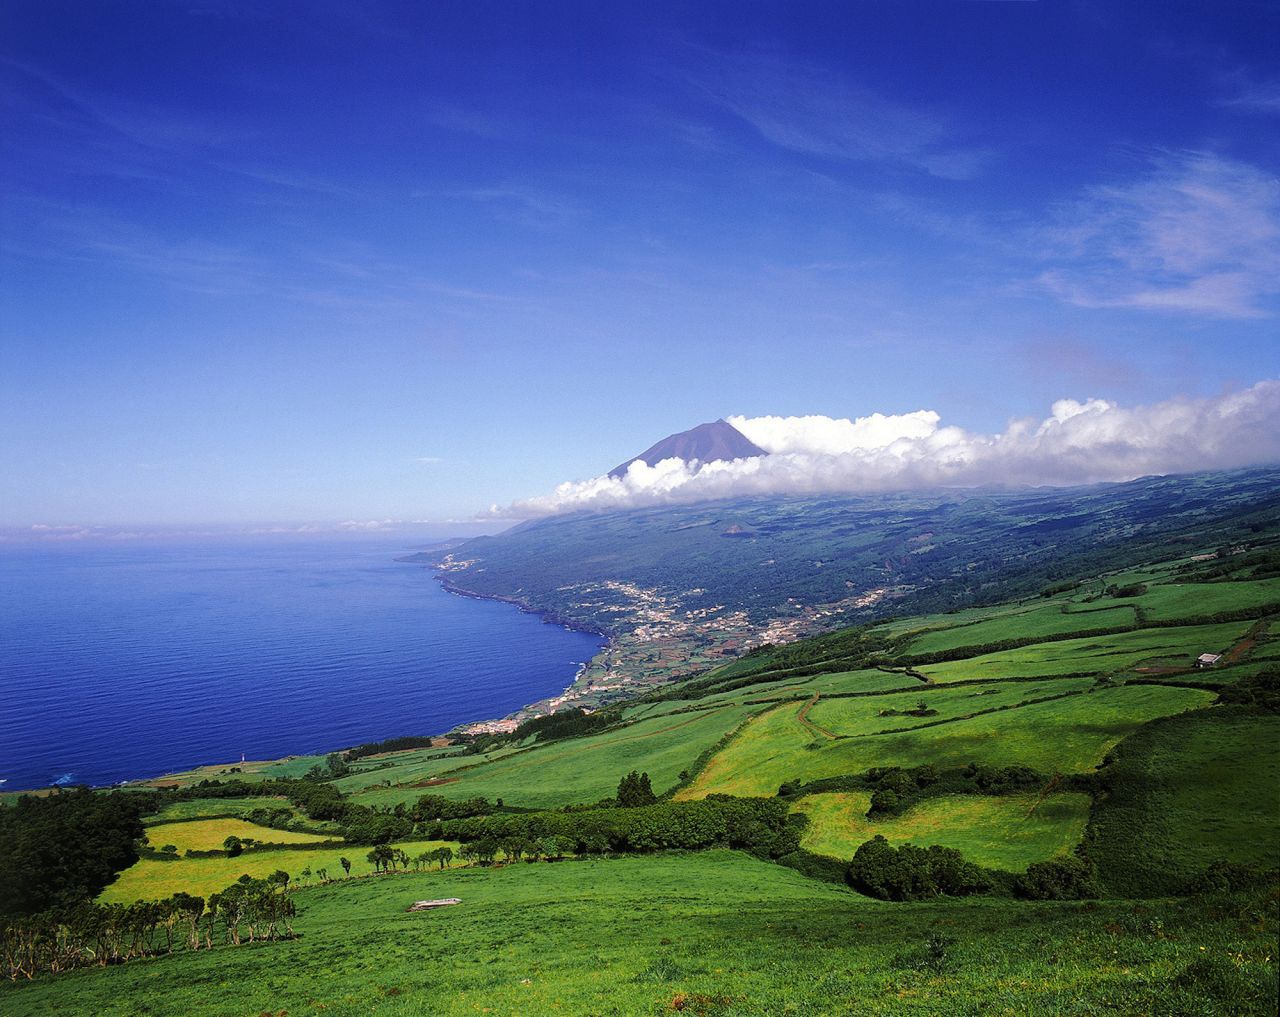 Pico Island is home to Portugal's highest mountain. At 7,700 feet tall, Mount Pico is often shrouded in clouds. 